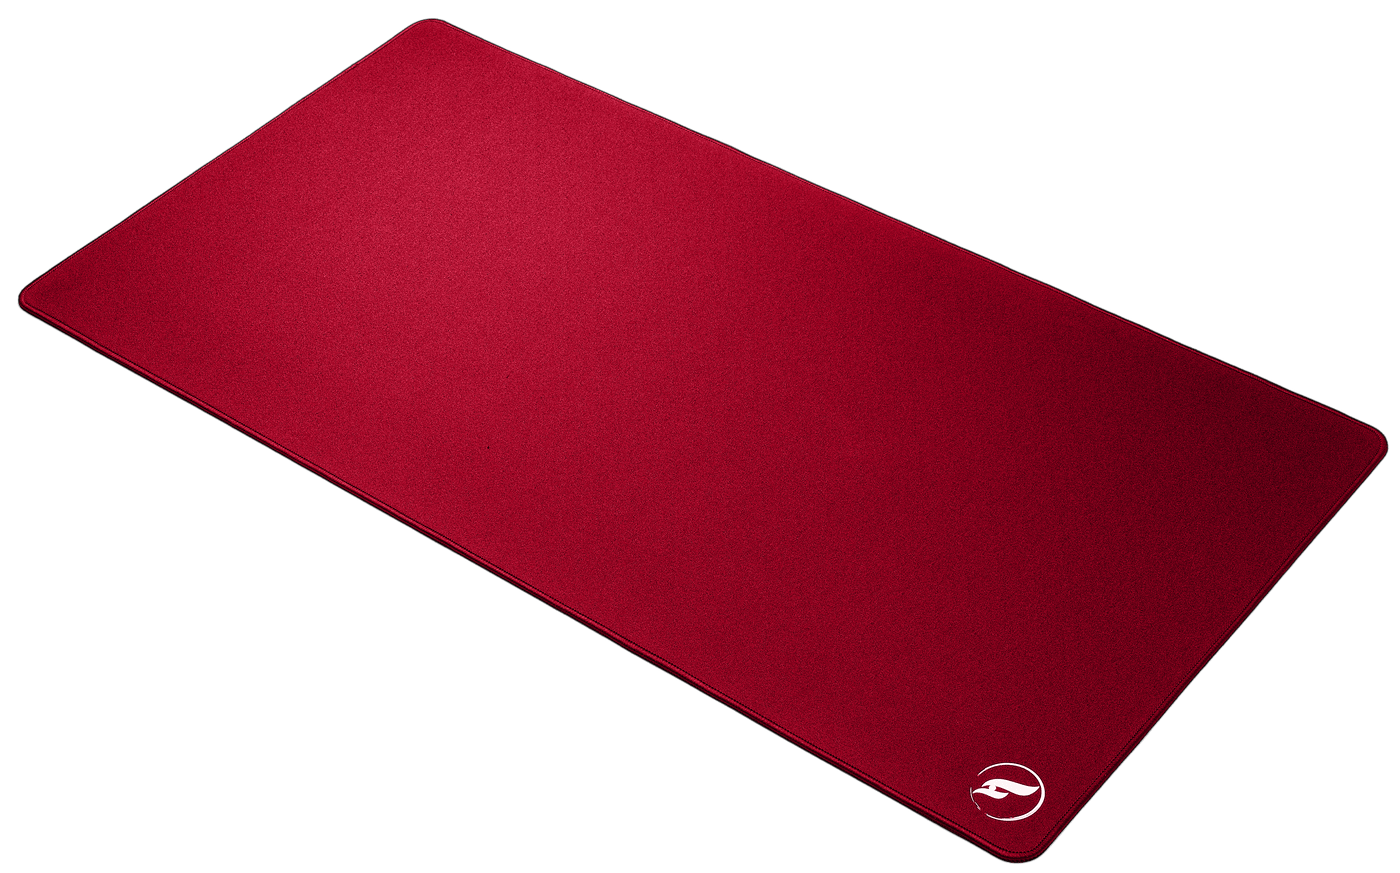 Infinity 2XL hybrid gaming mousepad red Odin Gaming